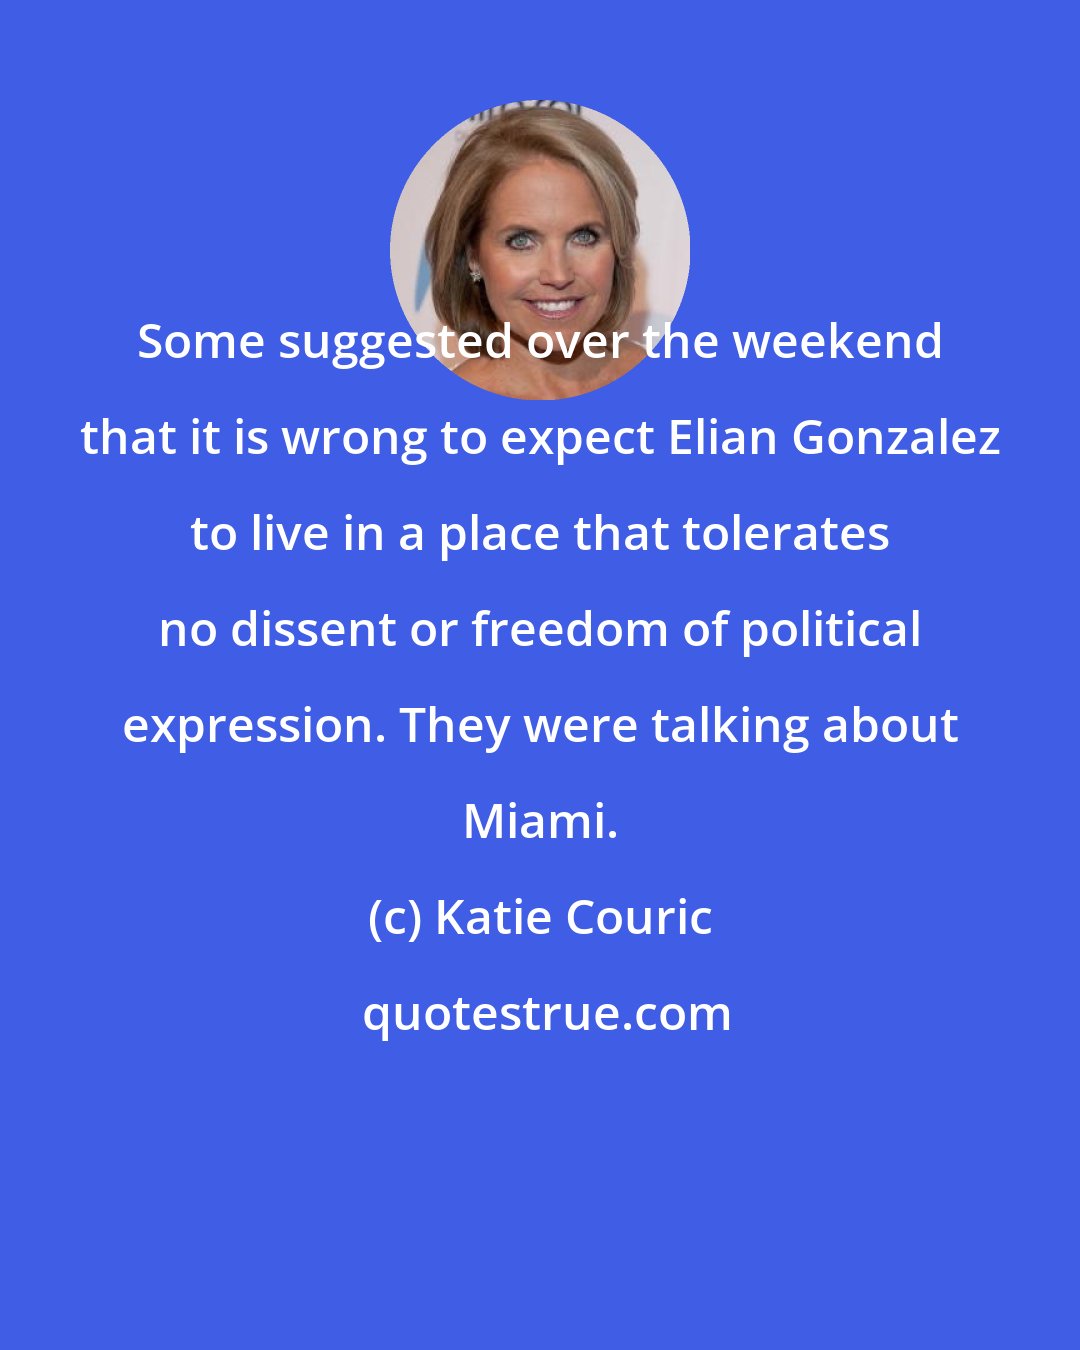 Katie Couric: Some suggested over the weekend that it is wrong to expect Elian Gonzalez to live in a place that tolerates no dissent or freedom of political expression. They were talking about Miami.